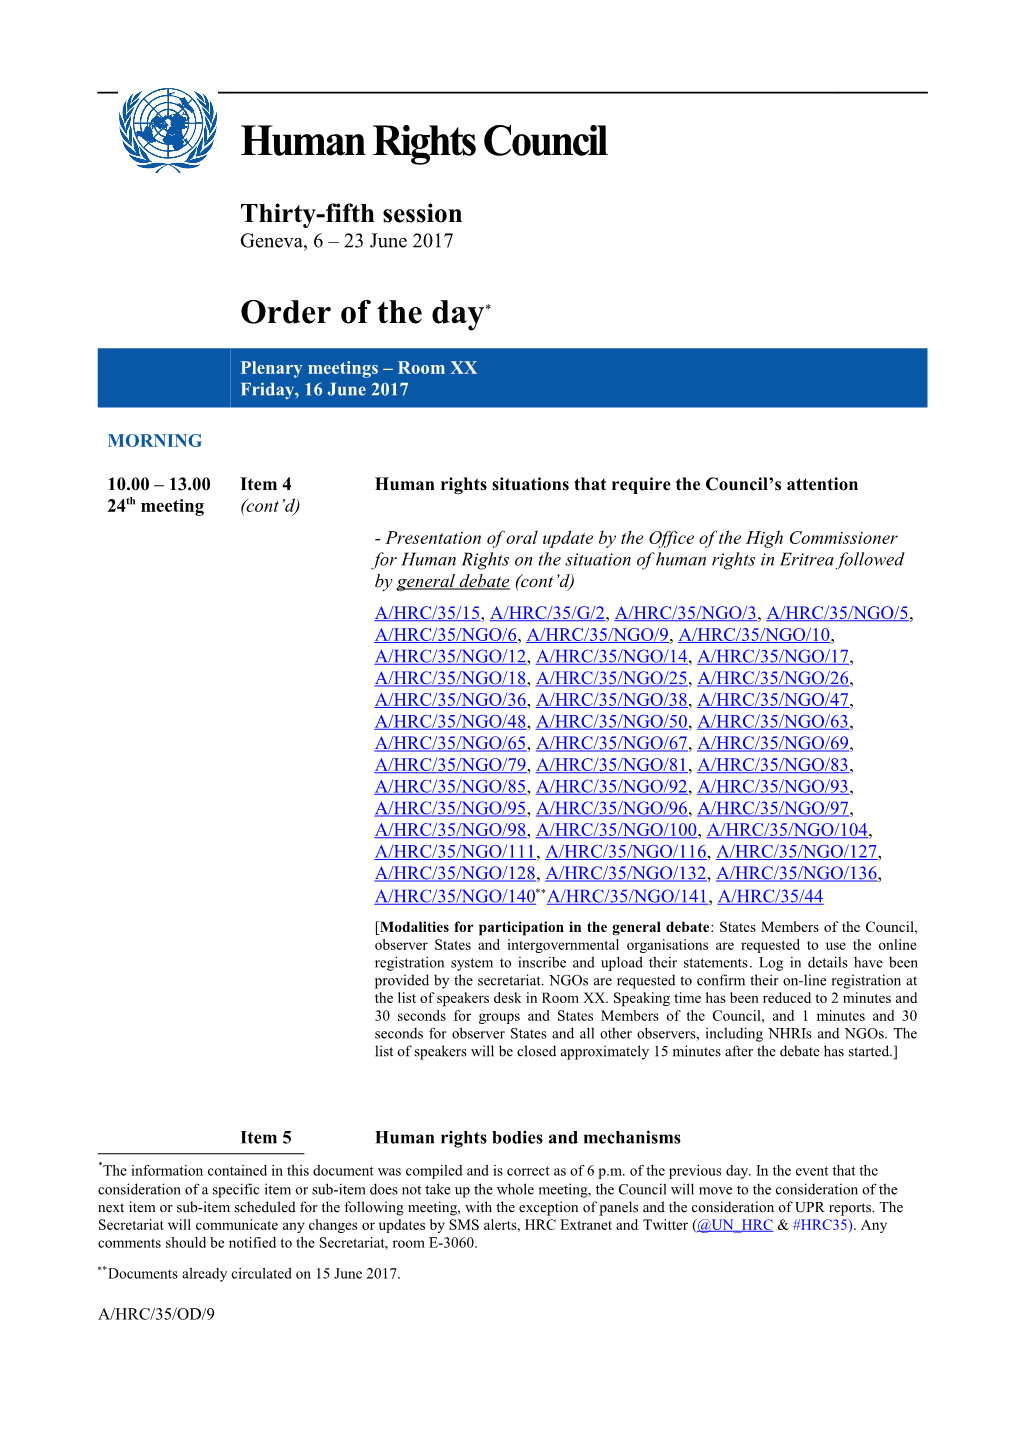 Order of the Day , Friday 16 June 2017